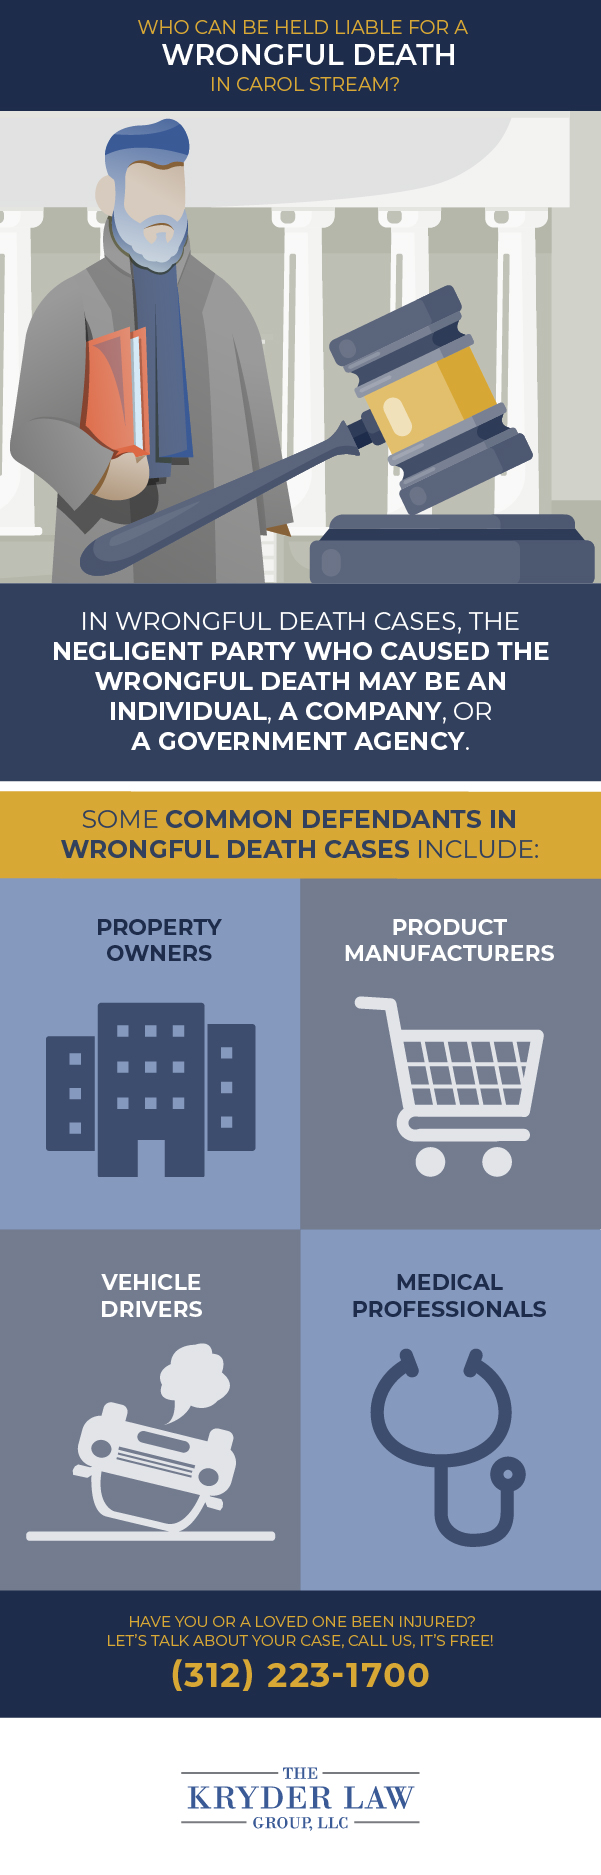 The Benefits of Hiring a Carol Stream Wrongful Death Lawyer Infographic